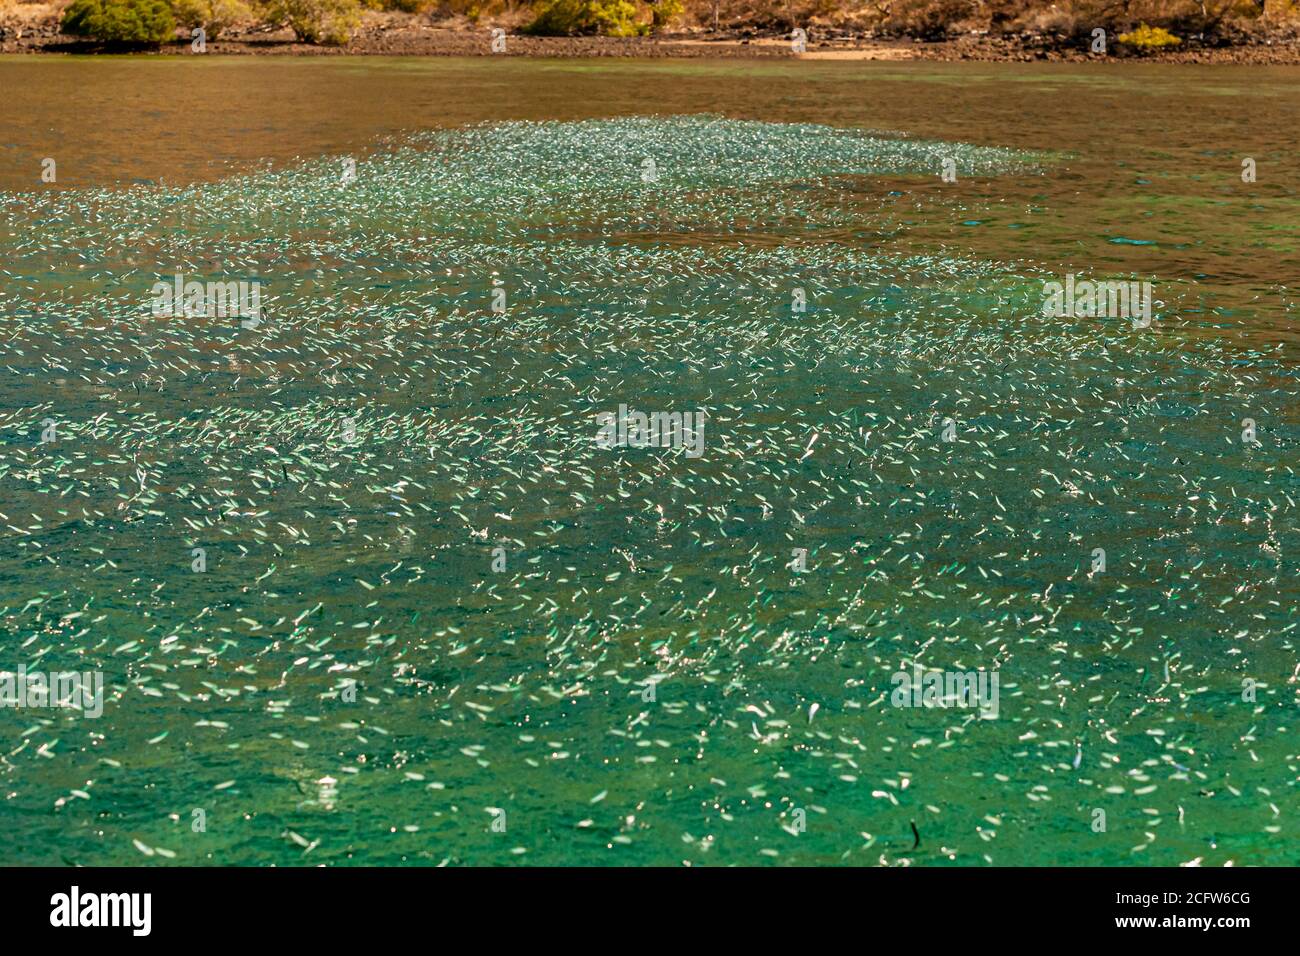 Anchovies jump out of the water en masse, indicating the presence of predatory fish Stock Photo